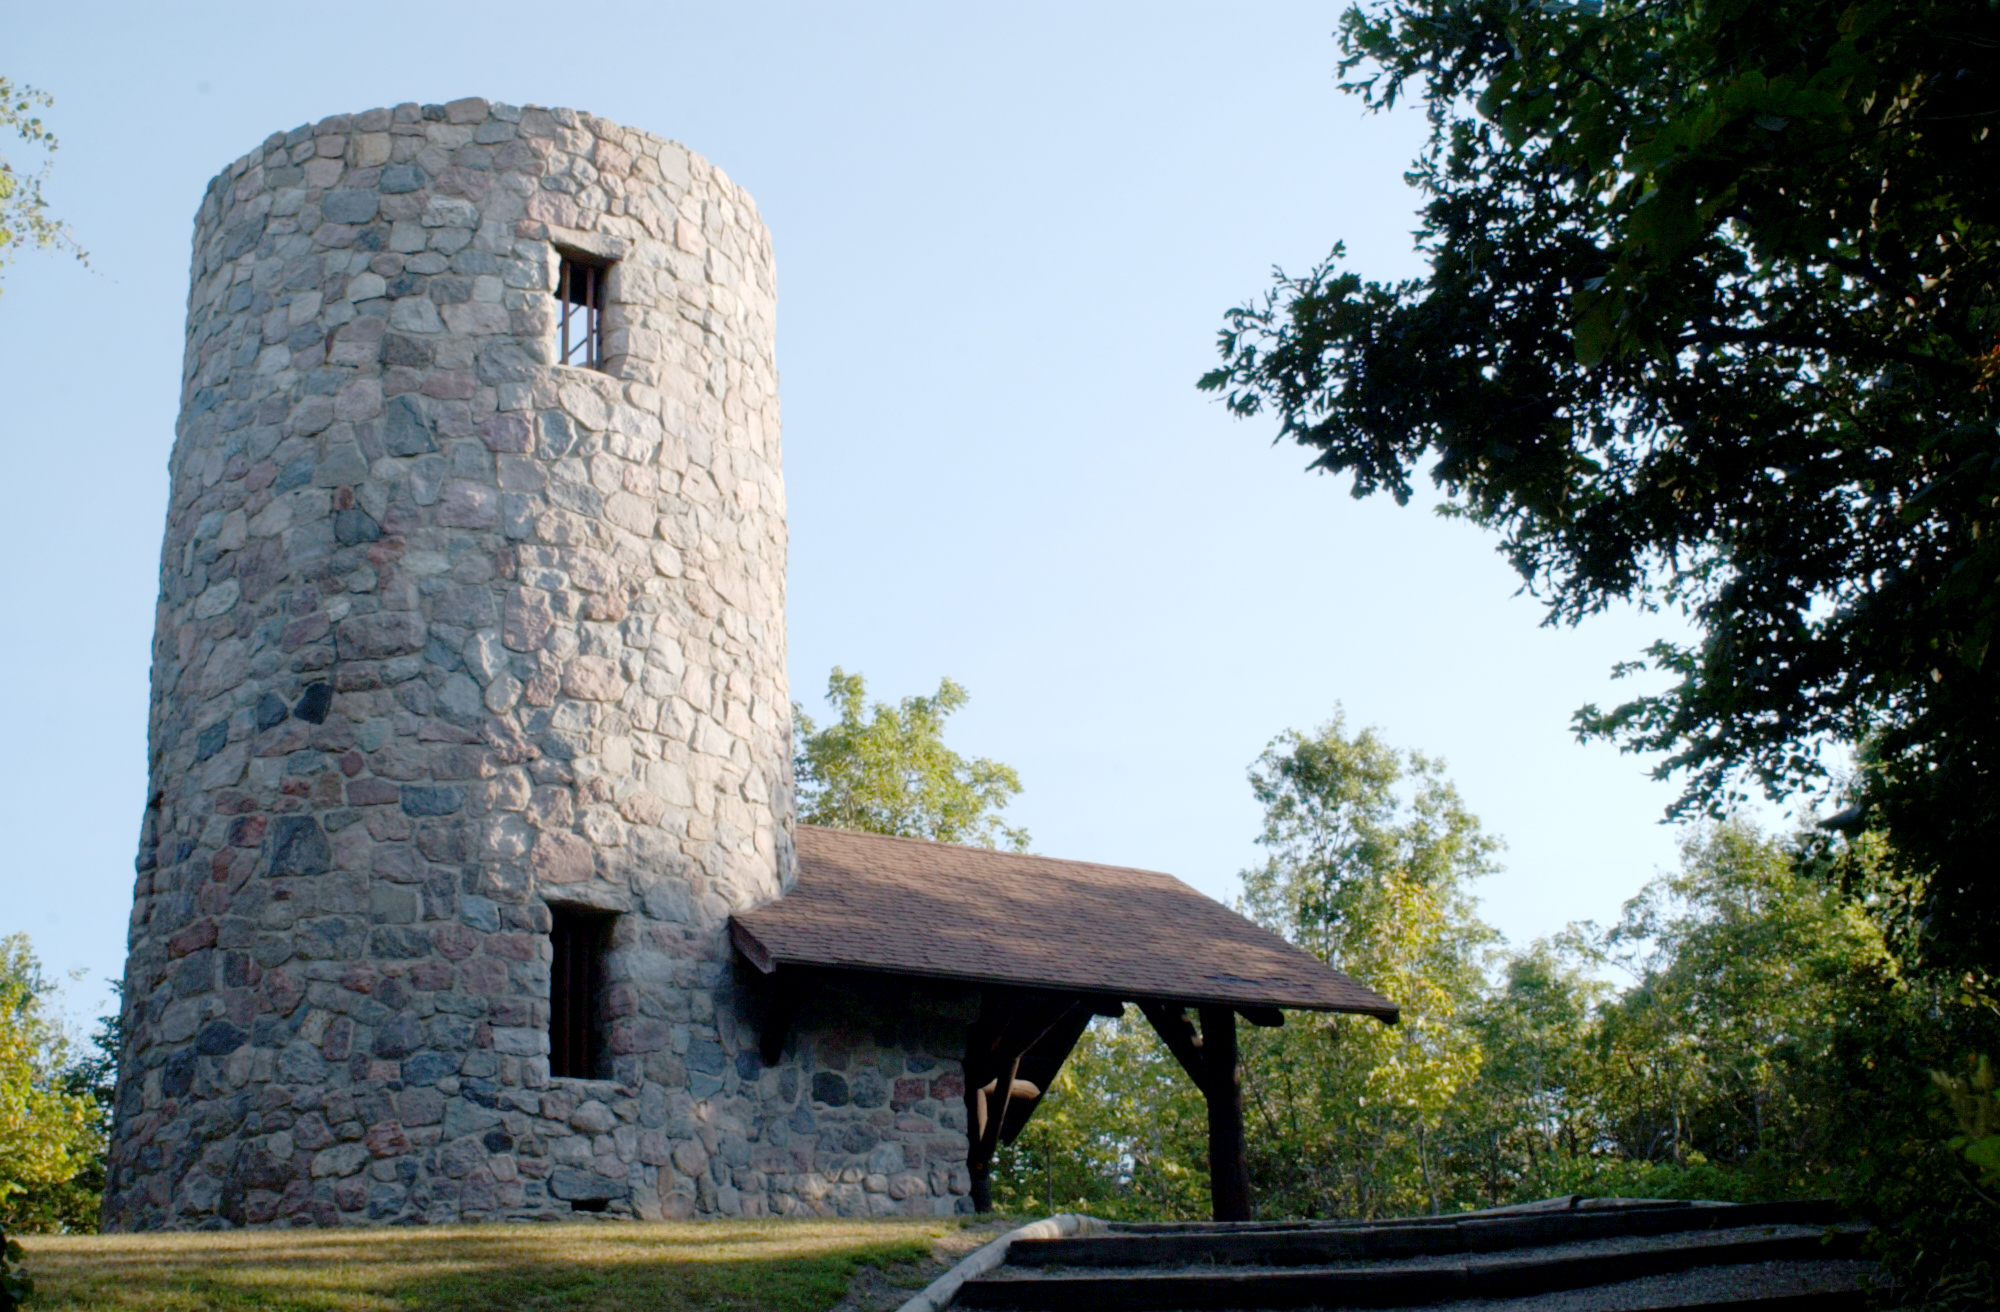 The Civilian Conservation Corps built the impressive and iconic stone observation tower at Pilot Knob State Park in the 1930s.